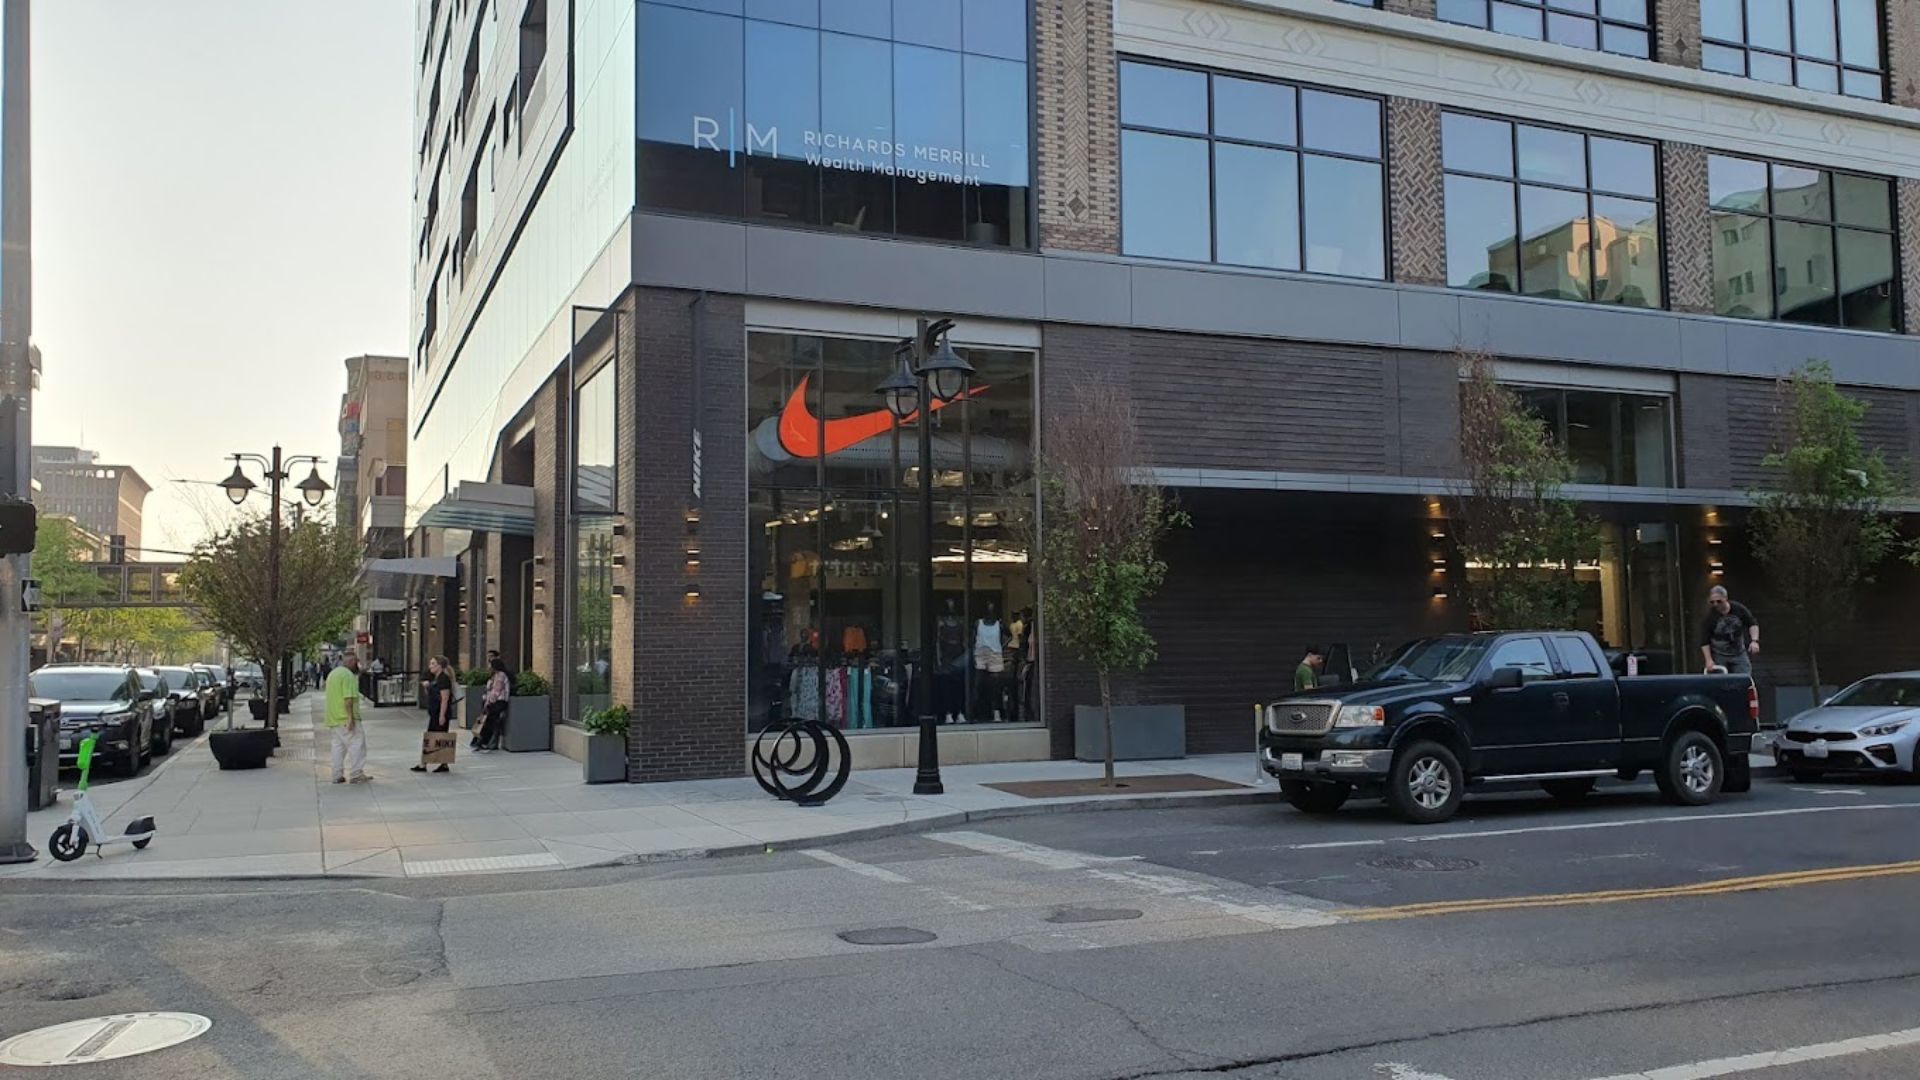 Street view of the Nike Store building in Downtown Spokane with Richard's Merrill Wealth Management, pedestrians and vehicles visible.